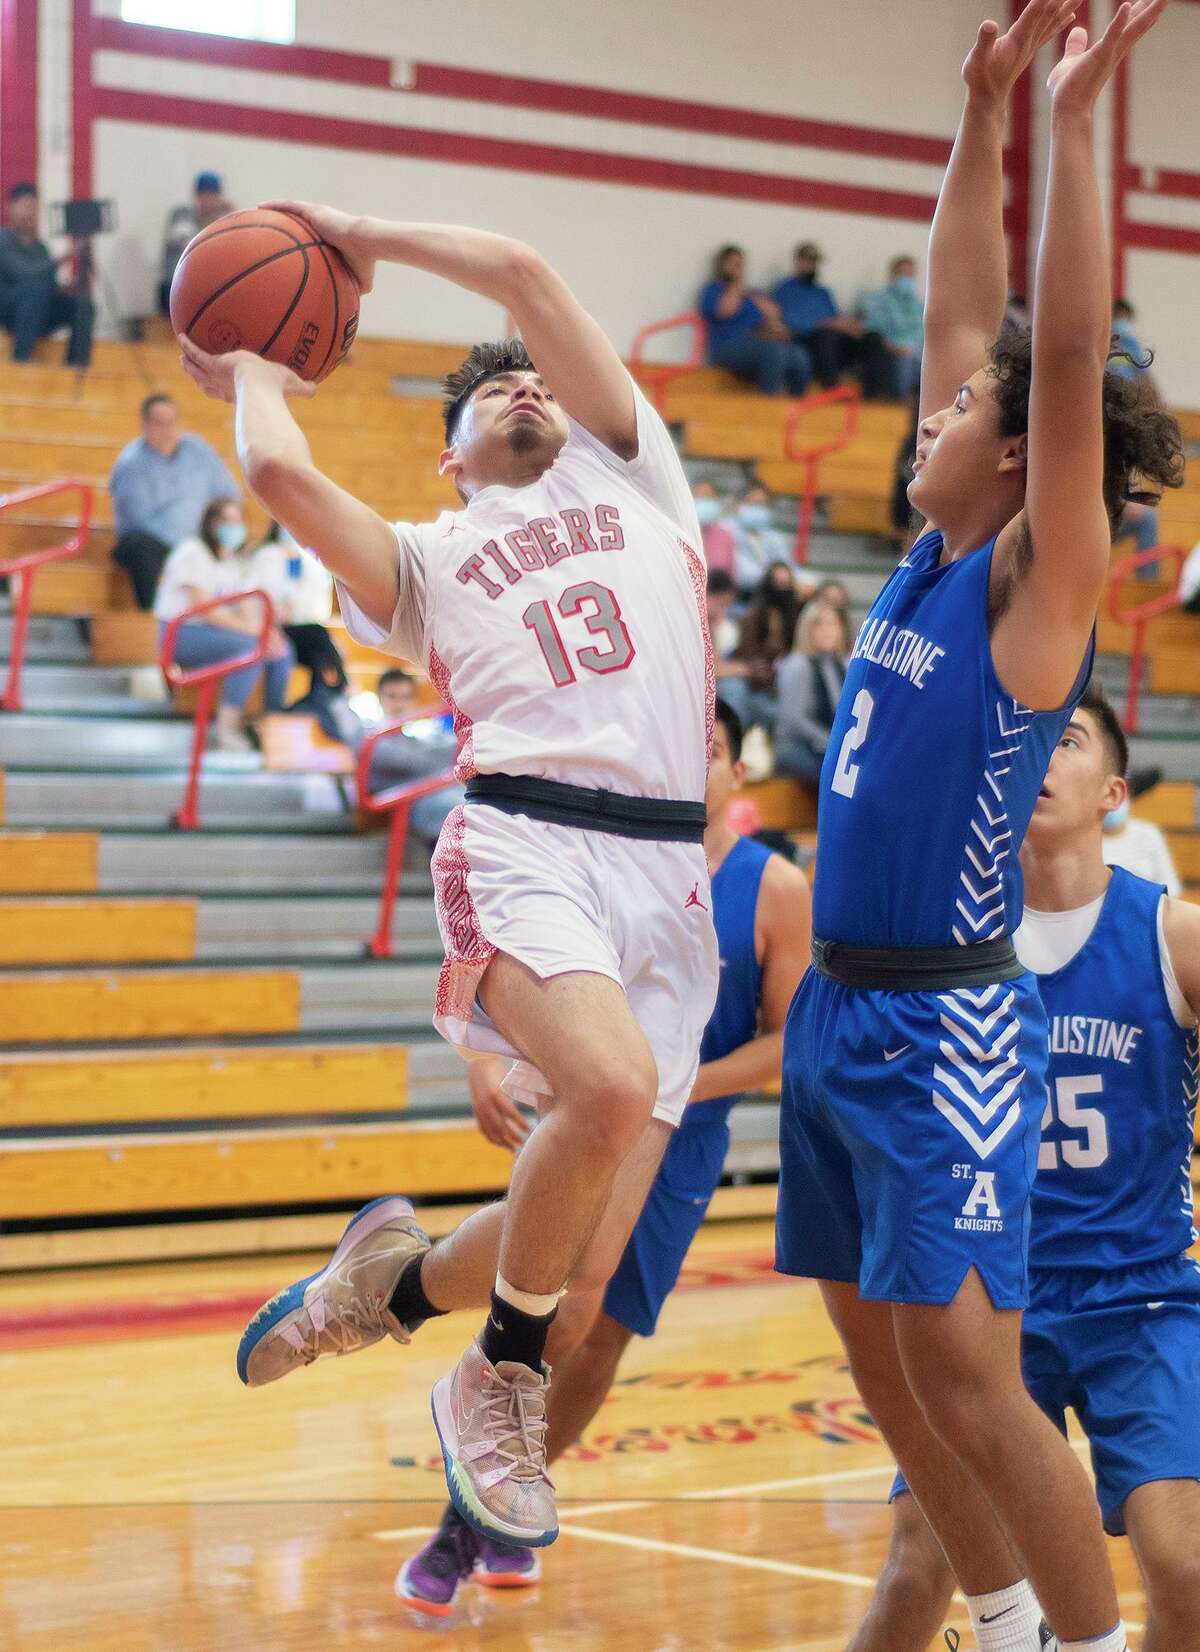 Martin High School’s Alexander Ledesma goes for a layup as St. Augustine High School’s Diego Romo defends, Tuesday, Dec. 21, 2021 at Martin High School.